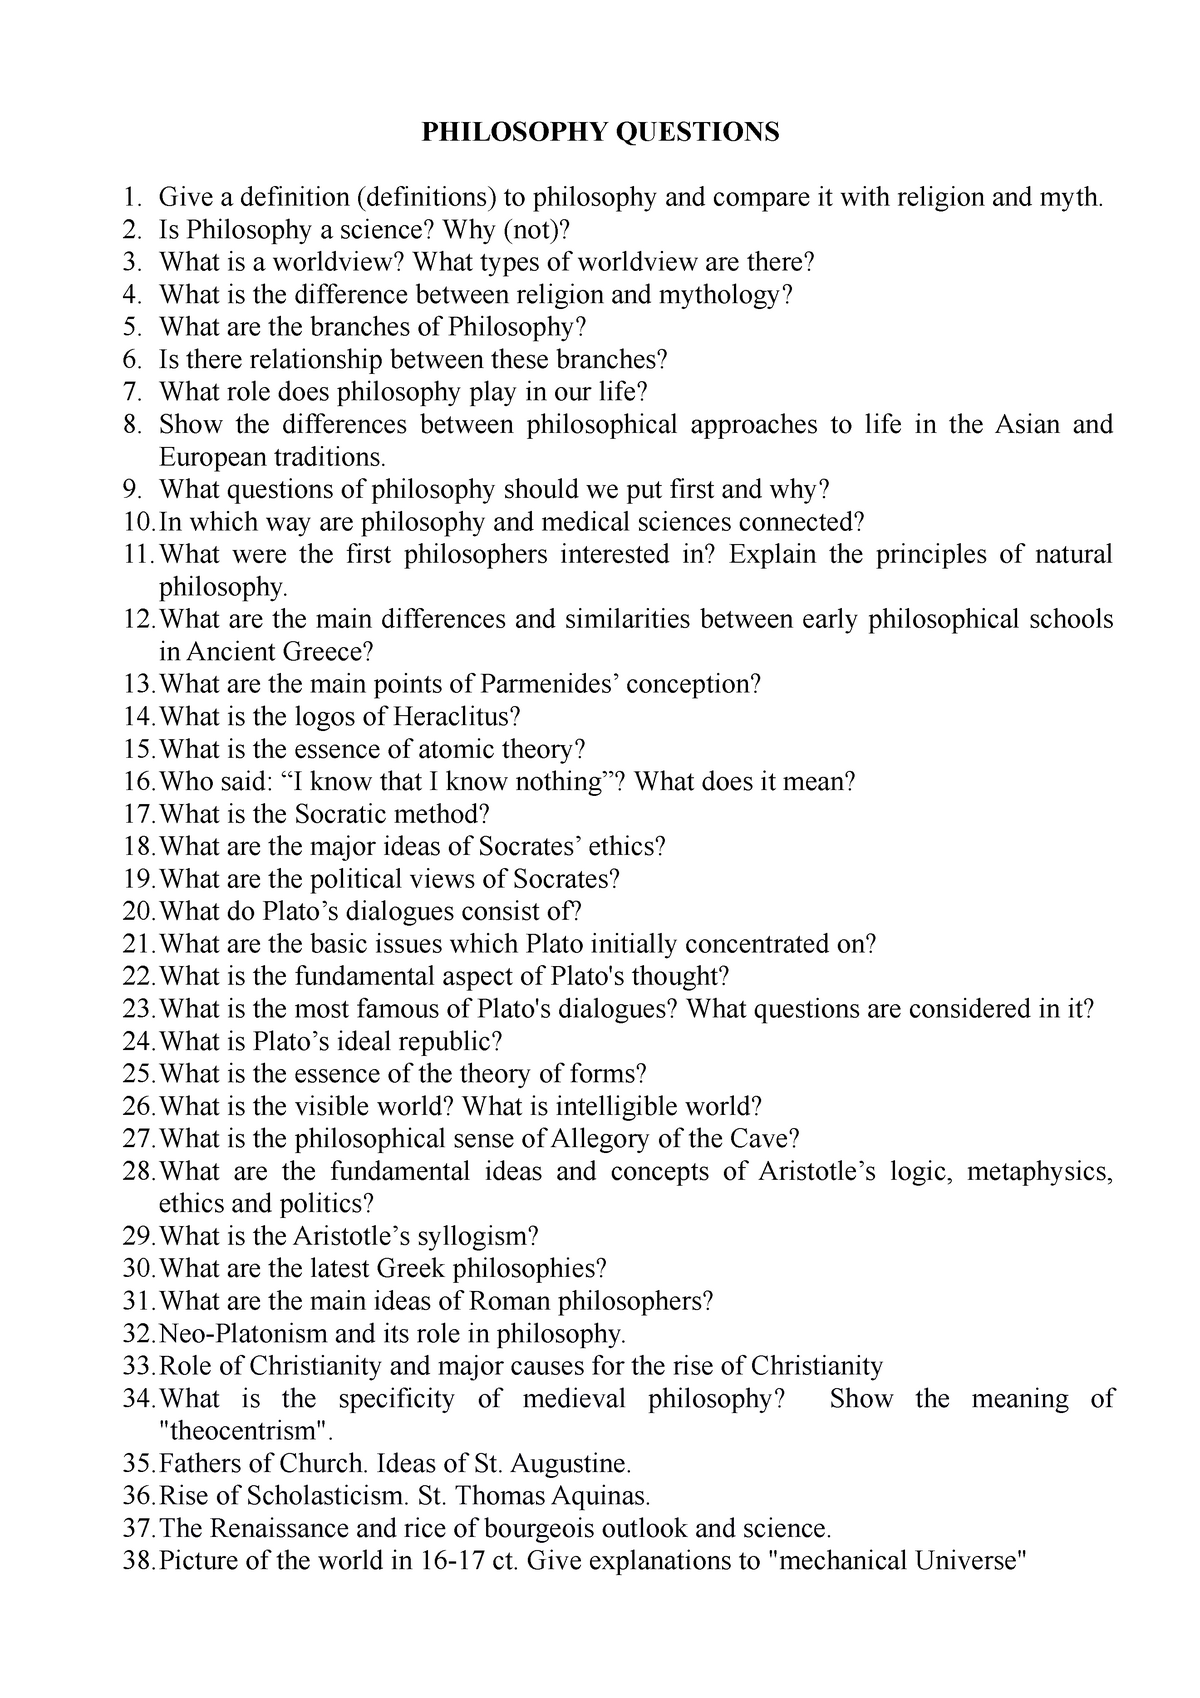 Philosophy questions - Grade: Year - PHILOSOPHY QUESTIONS 1. 2. 3. 4. 5 ...